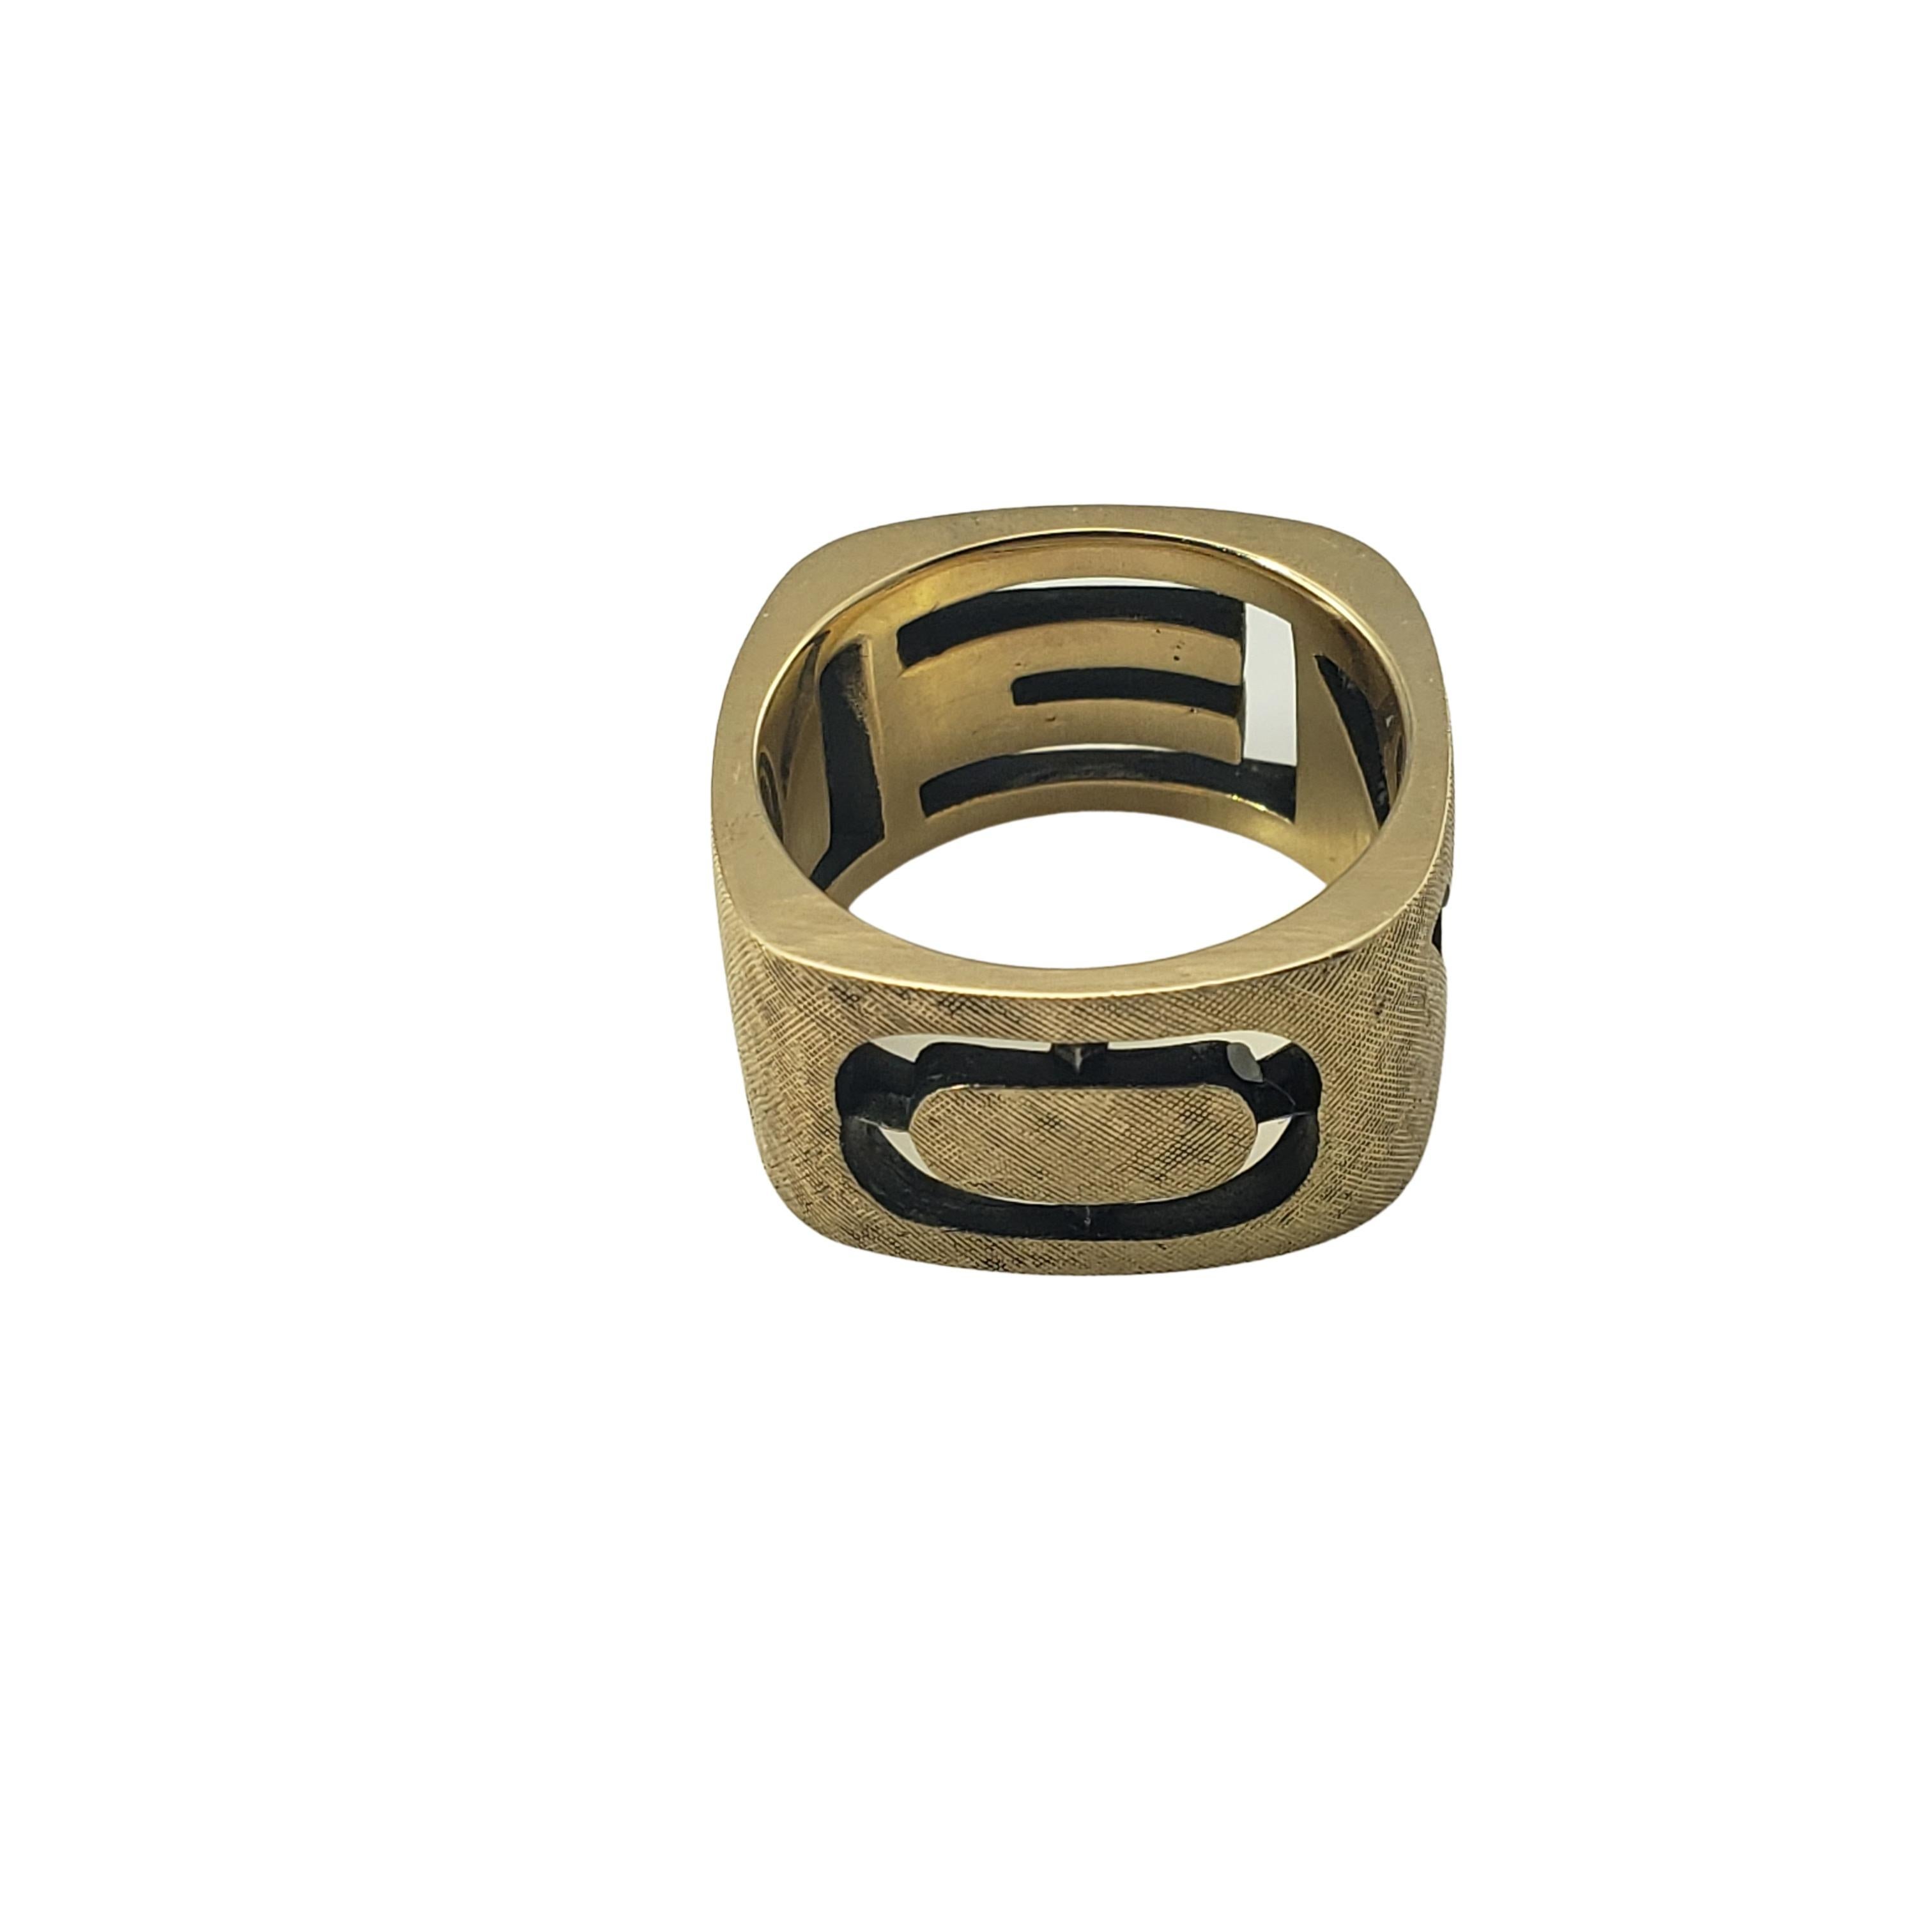 14 Karat Yellow Gold LOVE Ring Size 6.25-

This romantic square ring features the letters LOVE cut out on each side.  Width:  11 mm.

Size: 6.25

Weight:  8.0 dwt. /  12.5 gr.

Stamped:  14K

Very good condition, professionally polished.

Will come